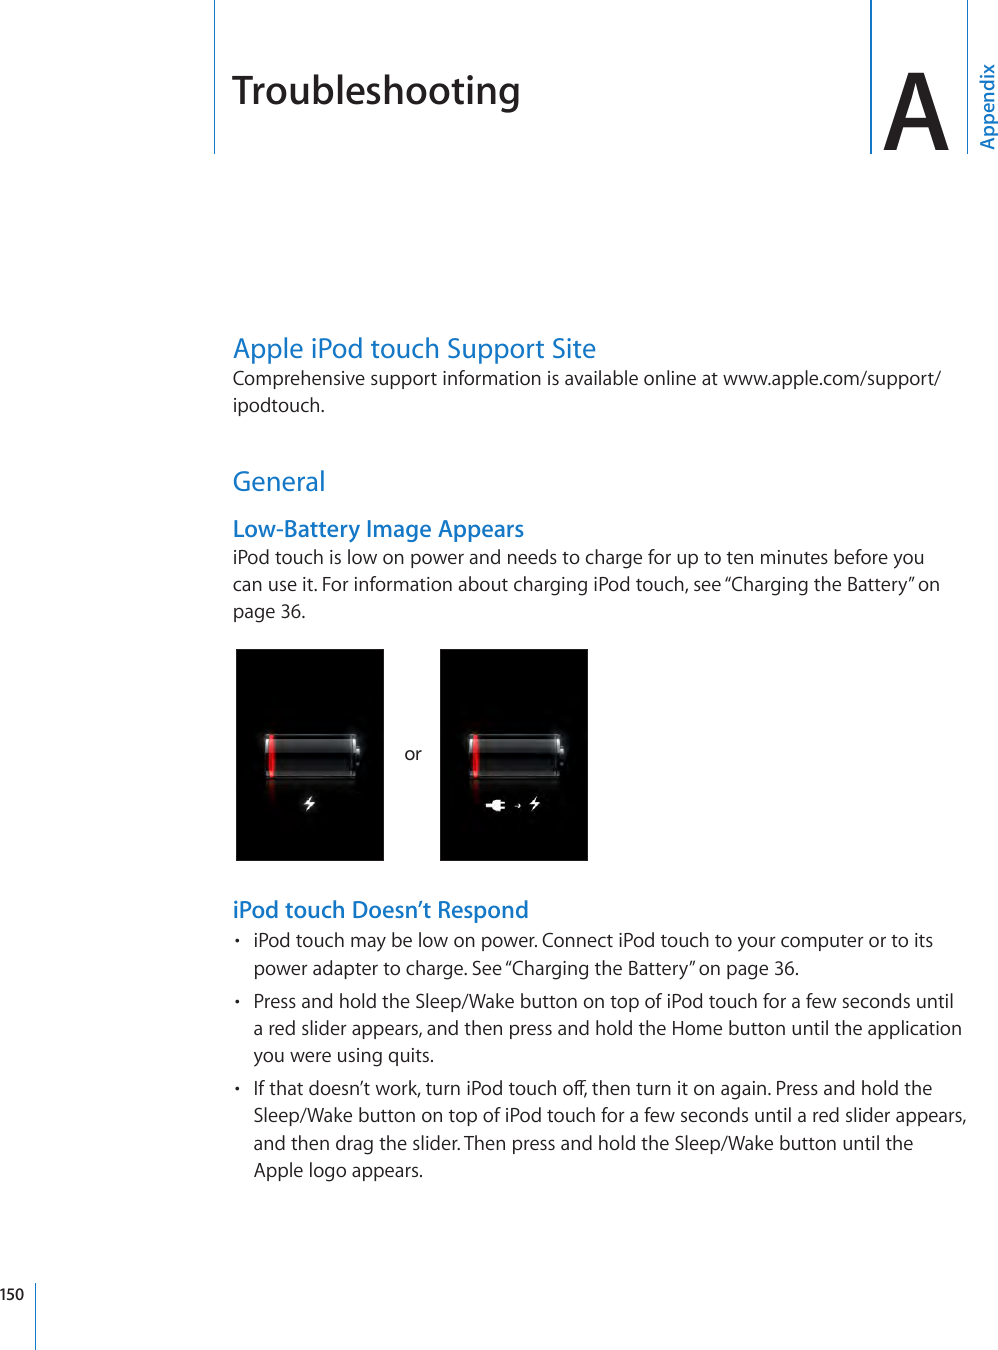 Troubleshooting AAppendixApple iPod touch Support SiteComprehensive support information is available online at www.apple.com/support/ipodtouch. GeneralLow-Battery Image AppearsiPod touch is low on power and needs to charge for up to ten minutes before you can use it. For information about charging iPod touch, see “Charging the Battery” on page 36.oriPod touch Doesn’t RespondiPod touch may be low on power. Connect iPod touch to your computer or to its • power adapter to charge. See “Charging the Battery” on page 36.Press and hold the Sleep/Wake button on top of iPod touch for a few seconds until • a red slider appears, and then press and hold the Home button until the application you were using quits.If that doesn’t work, turn iPod touch o, then turn it on again. Press and hold the • Sleep/Wake button on top of iPod touch for a few seconds until a red slider appears, and then drag the slider. Then press and hold the Sleep/Wake button until the Apple logo appears.150